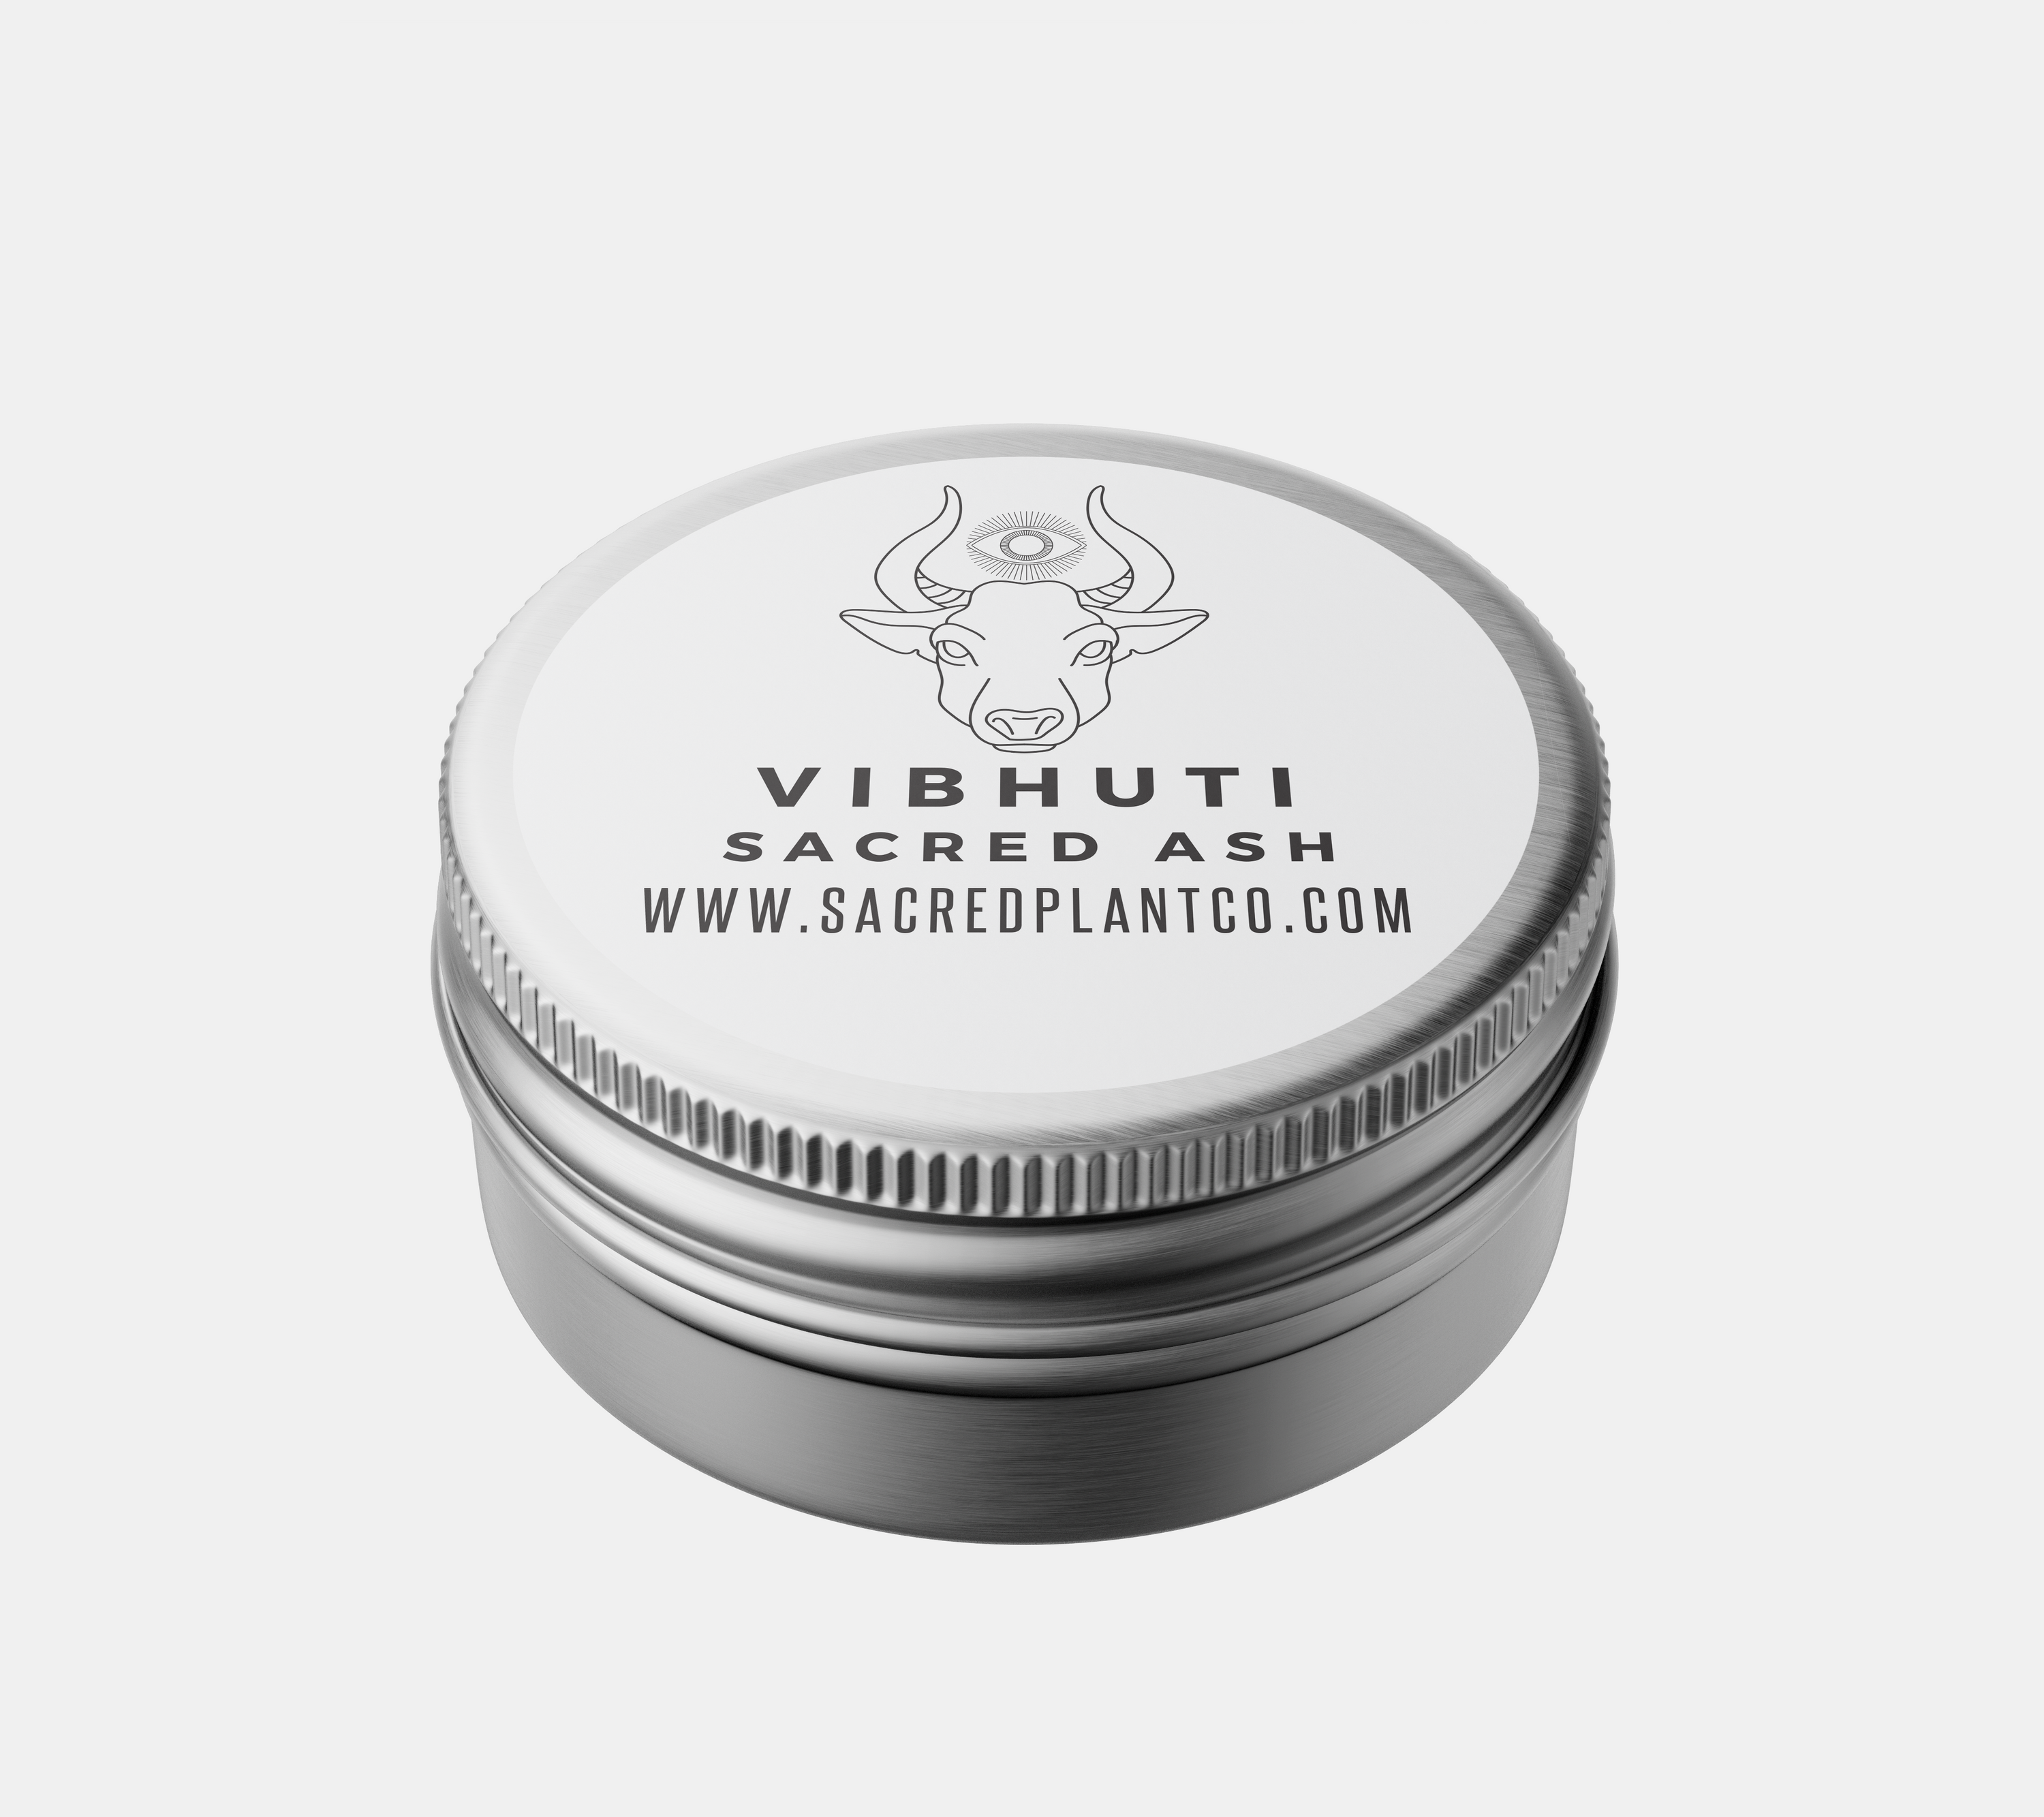 Vibhuti Sacred Ash in a tin container from Sacred Plant Co, traditional Hindu ritual powder for spiritual practices, available online for purchase.